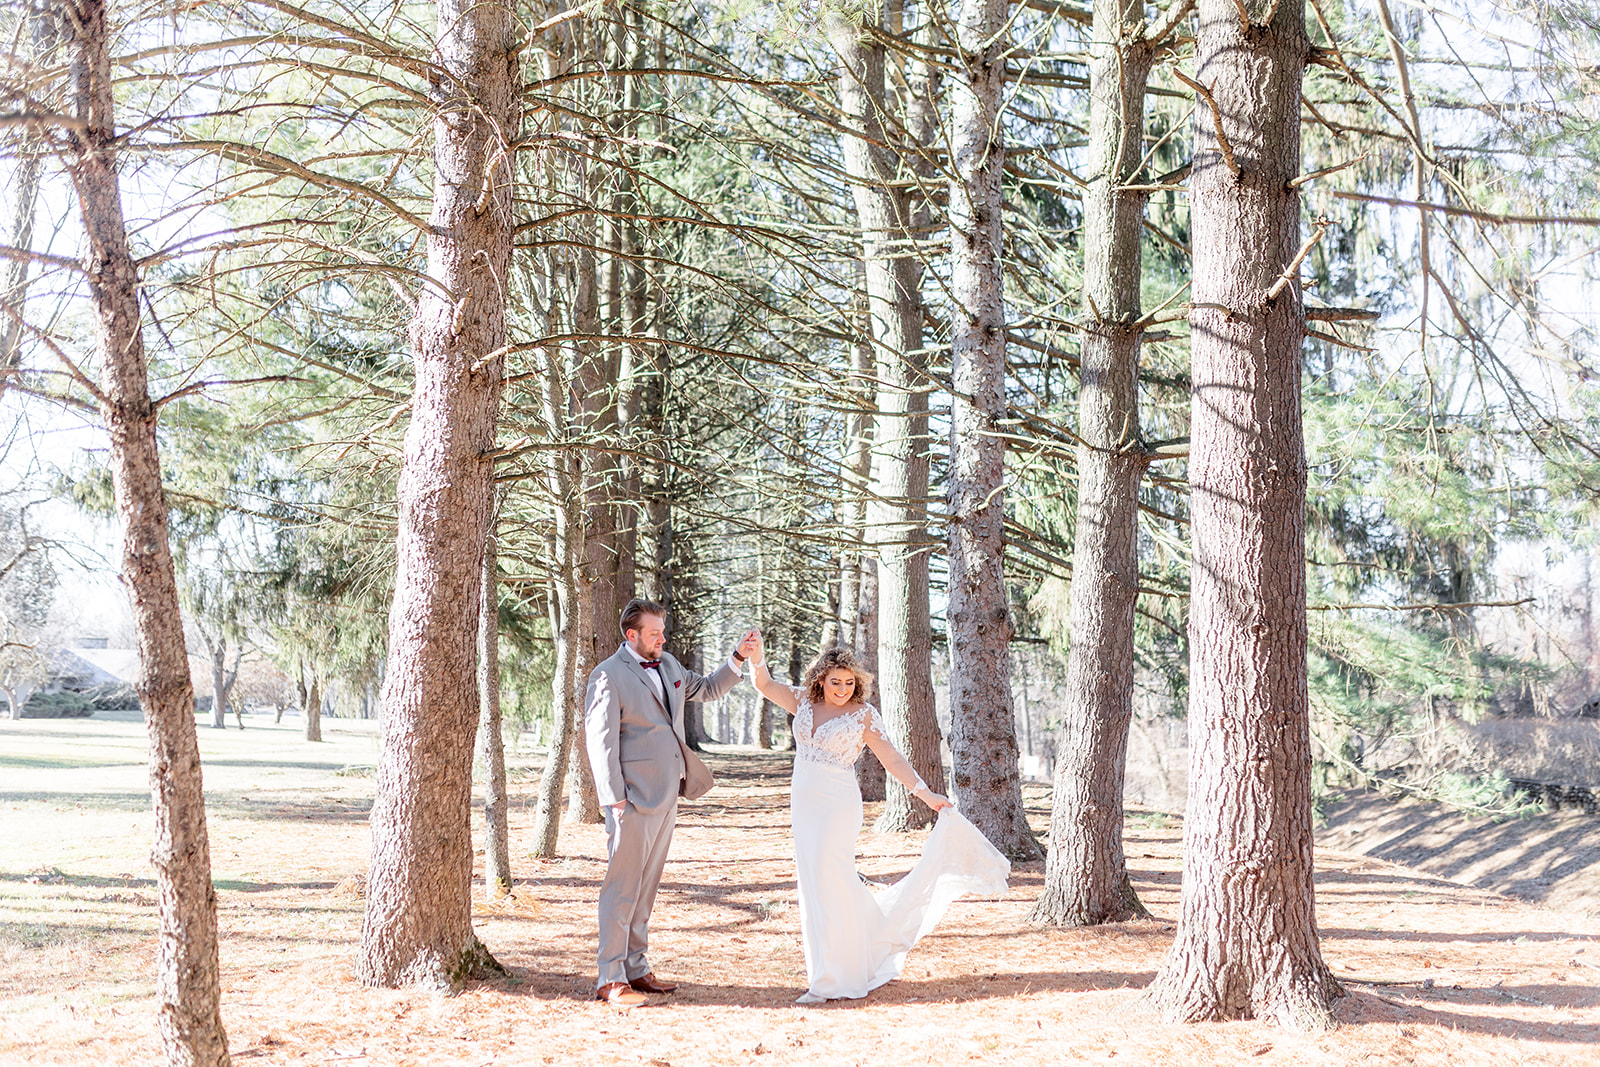 Newlyweds dance and twirl the dress in a line of tall pine trees at sunset at The Refinery At Perona Farms